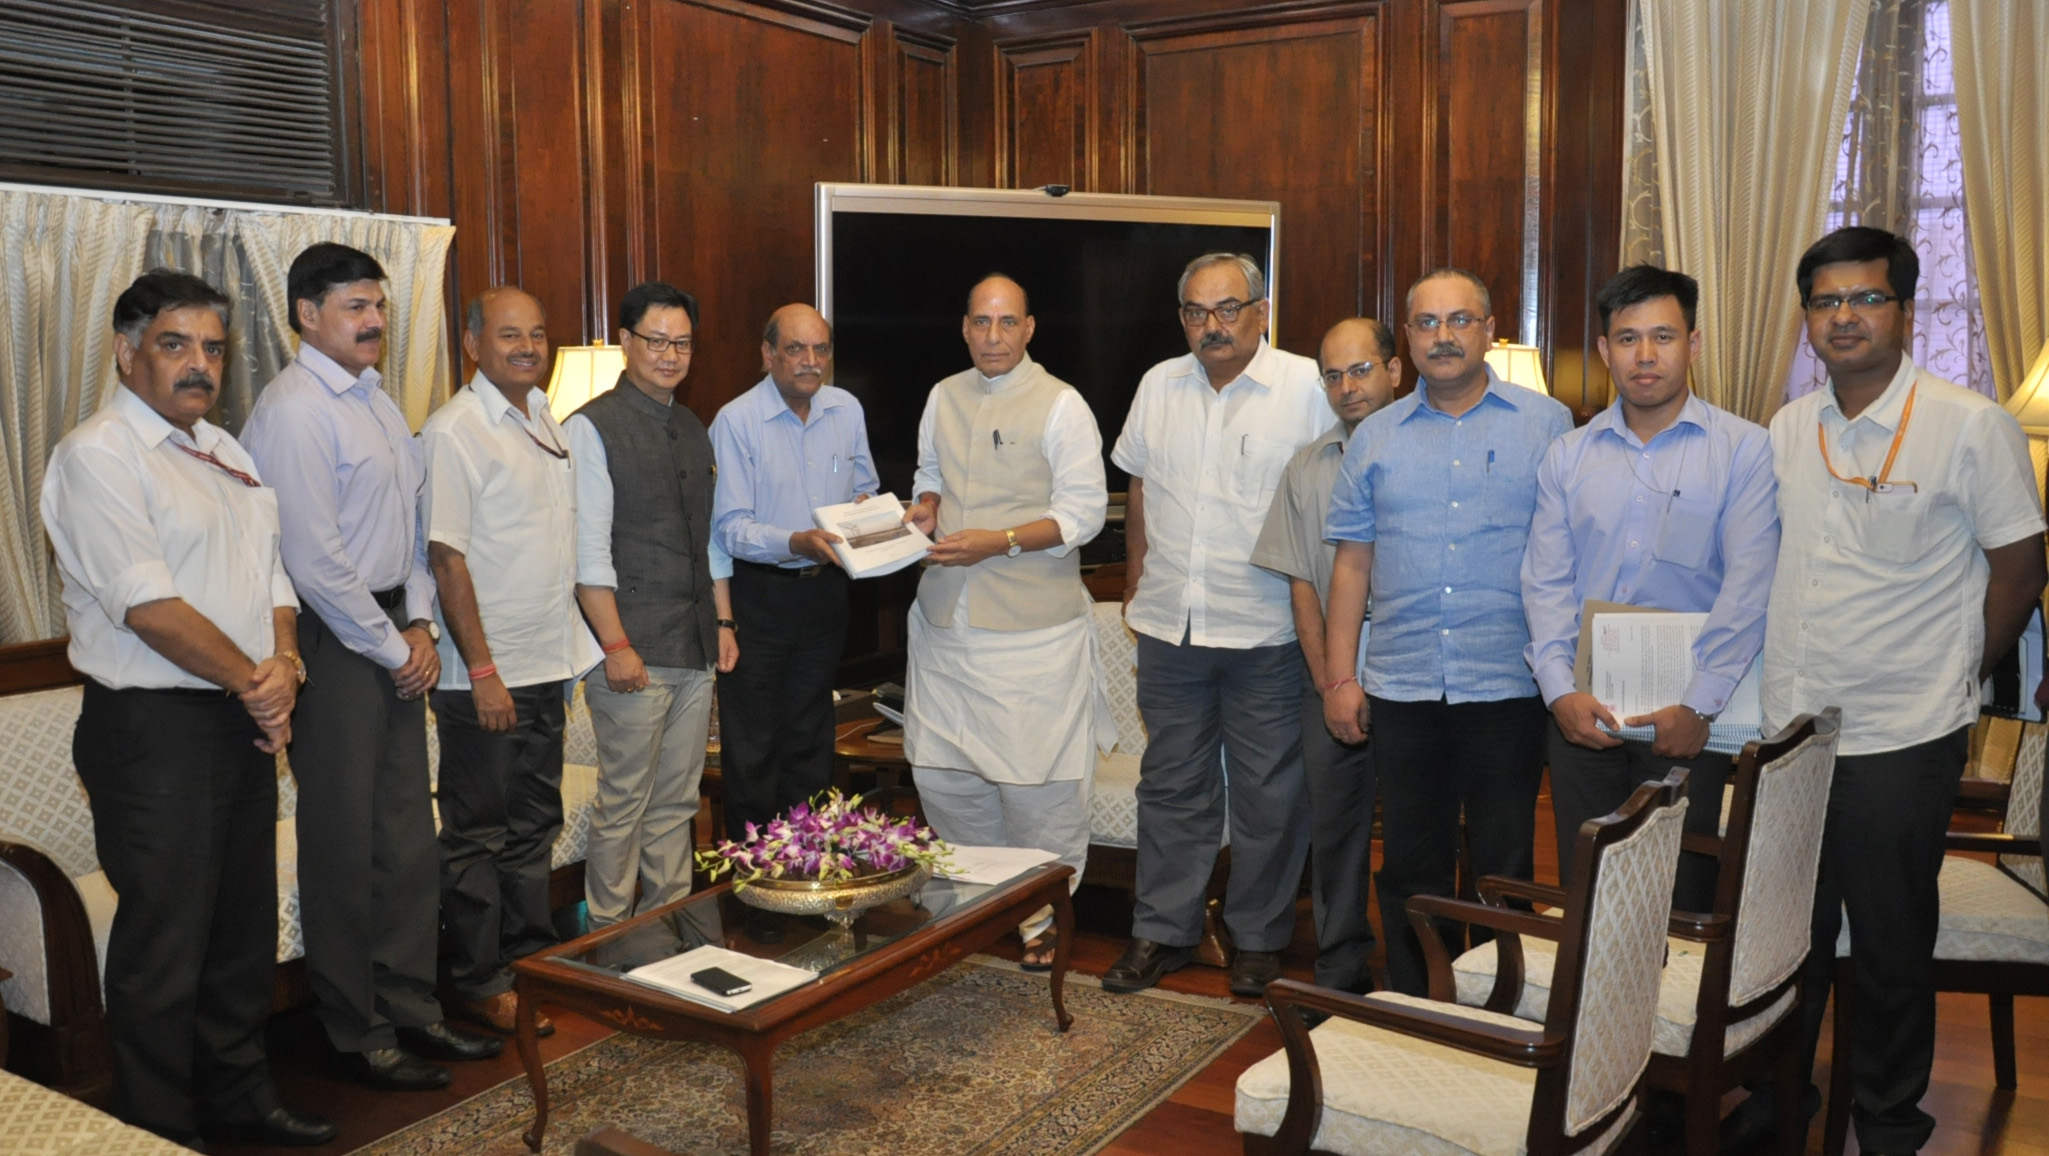 The Committee, under the Chairmanship of Shri Madhukar Gupta, to strengthen border protection, presents its report to the Union Home Minister, Shri Rajnath Singh, in New Delhi on August 29, 2016.  The Minister of State for Home Affairs, Shri Kiren Rijiju, the Members of the Committee, the Home Secretary, Shri Rajiv Mehrishi, the Secretary (Border Management), Shri Susheel Kumar and other senior officers of the Ministry are also seen.